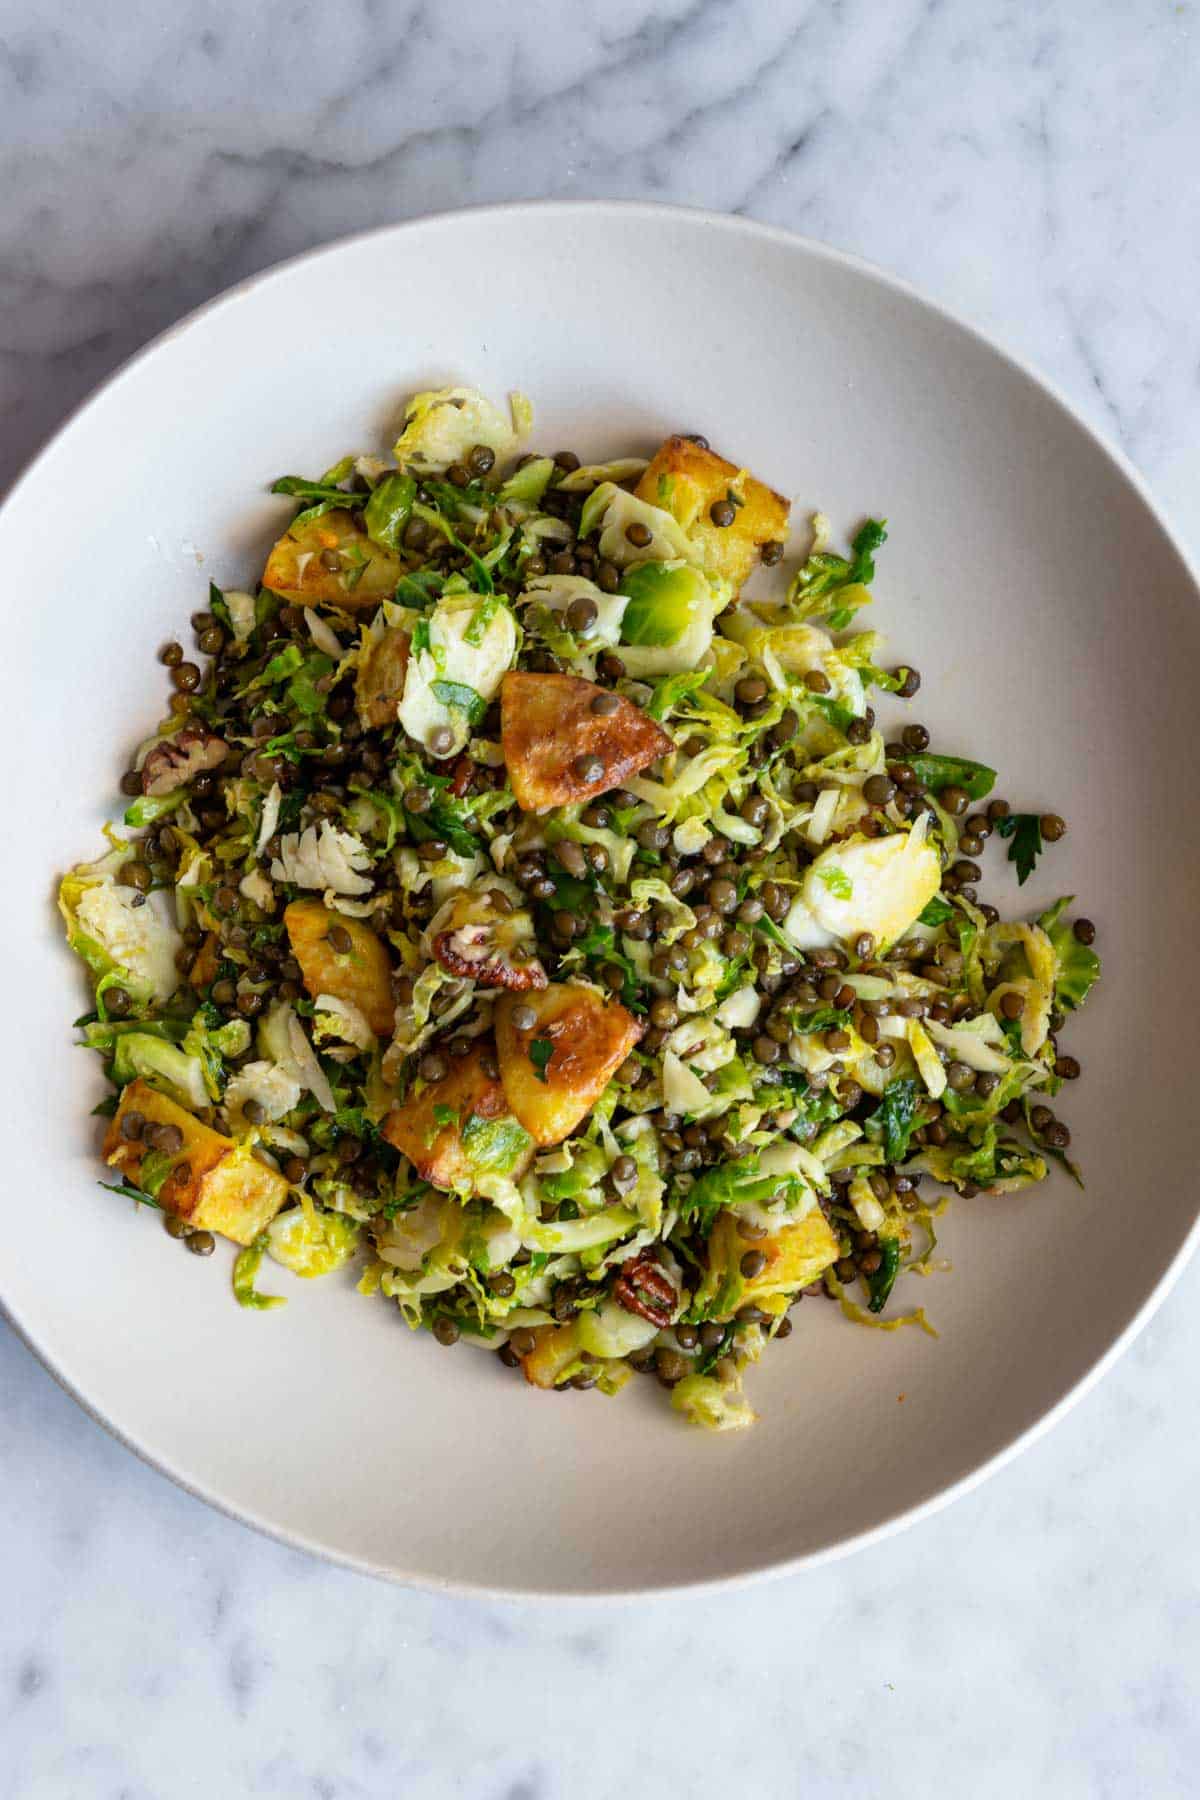 Warm shaved Brussels sprouts salad, roasted lentils, potato croutons, chopped pecans, and parsley in dressing, mixed and plated.